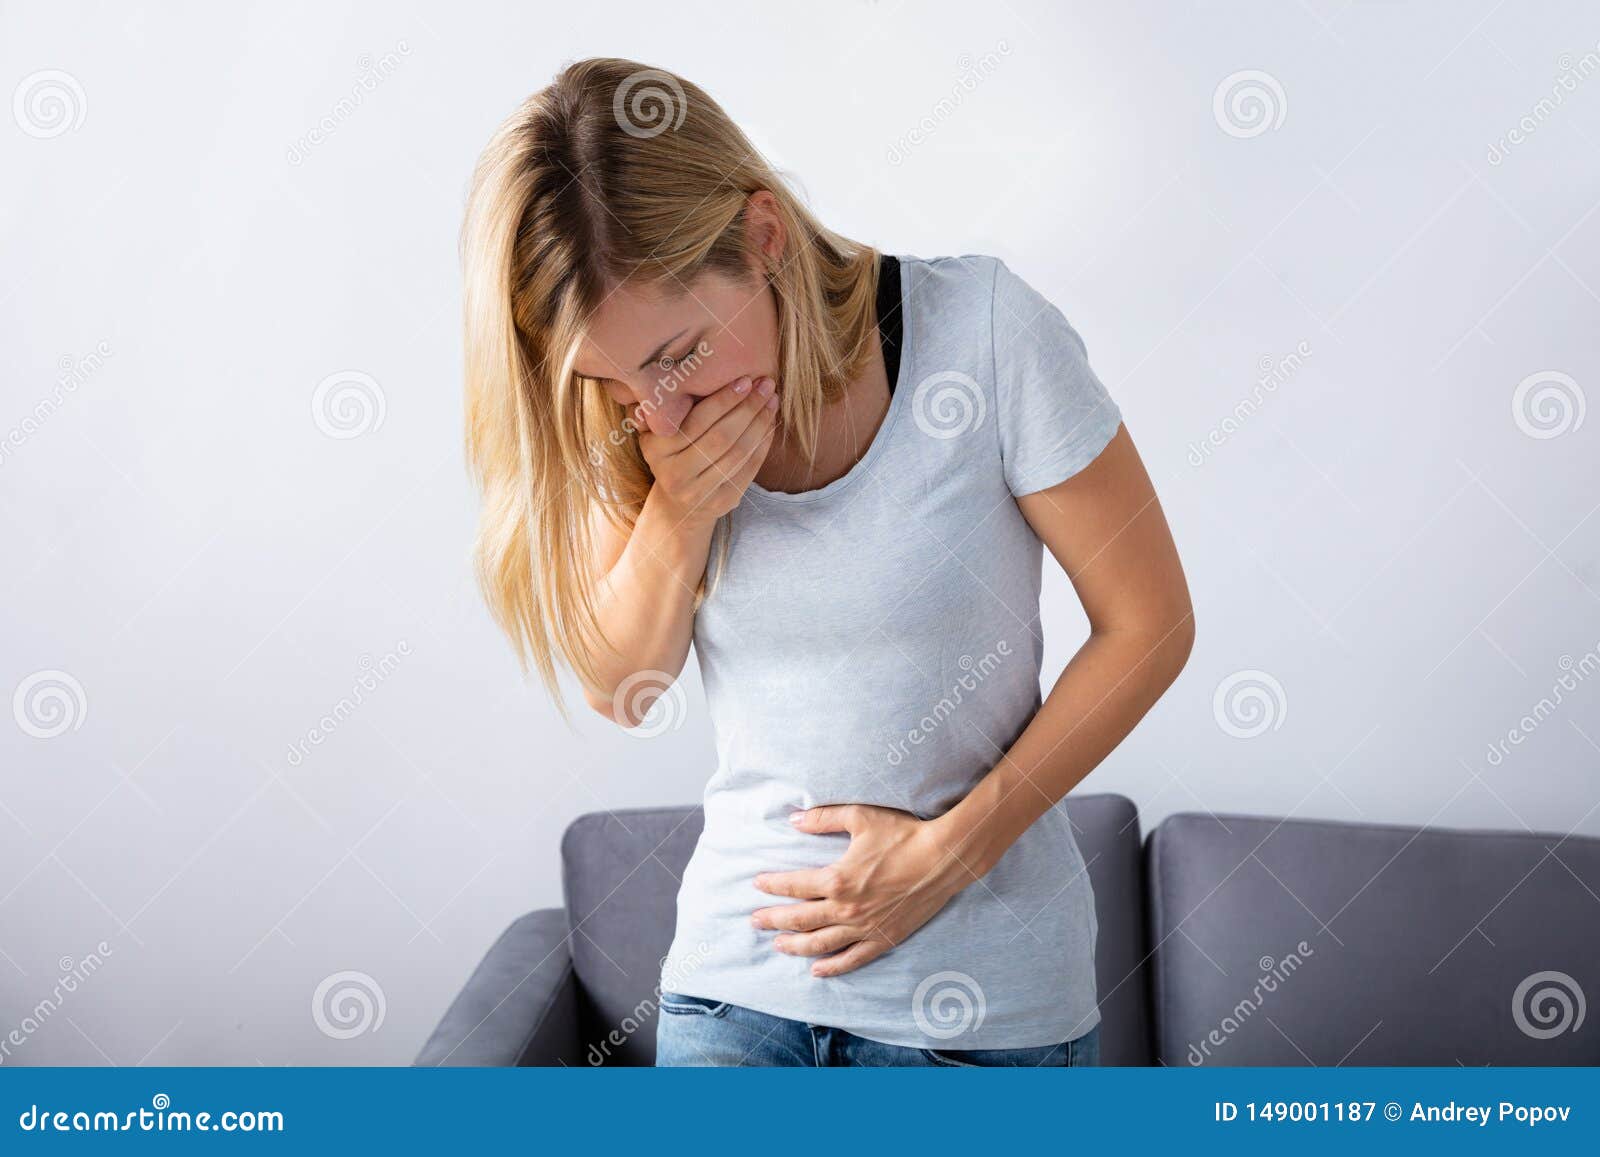 pregnant woman suffering from nausea